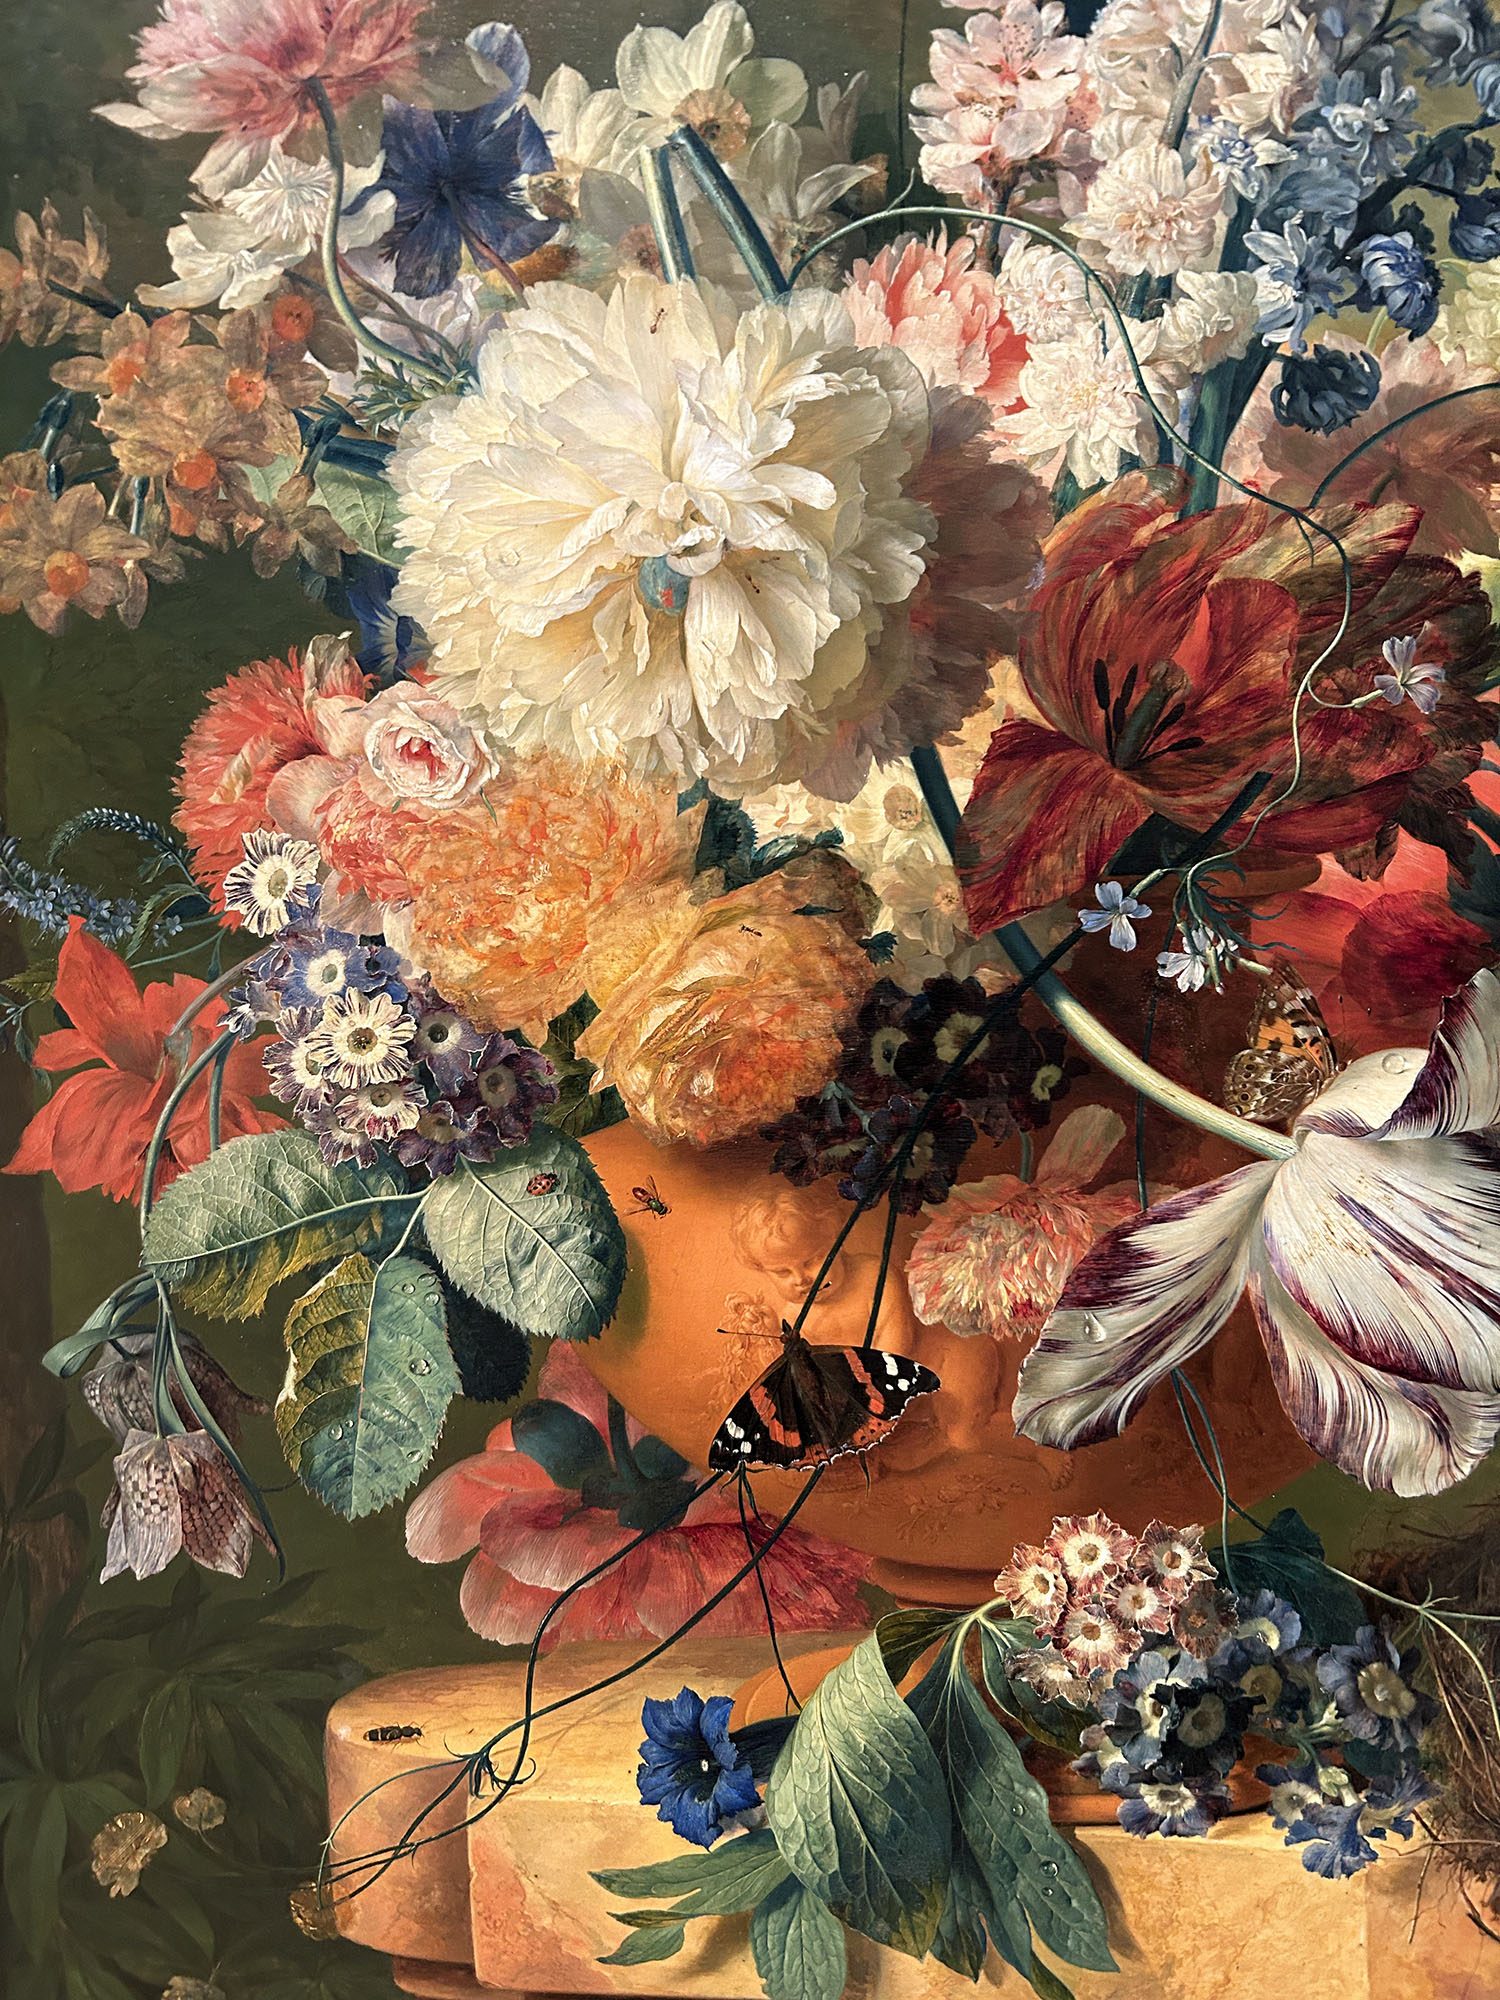 Coco & Voltaire - Vibrant floral painting at The Wallace Collection in London